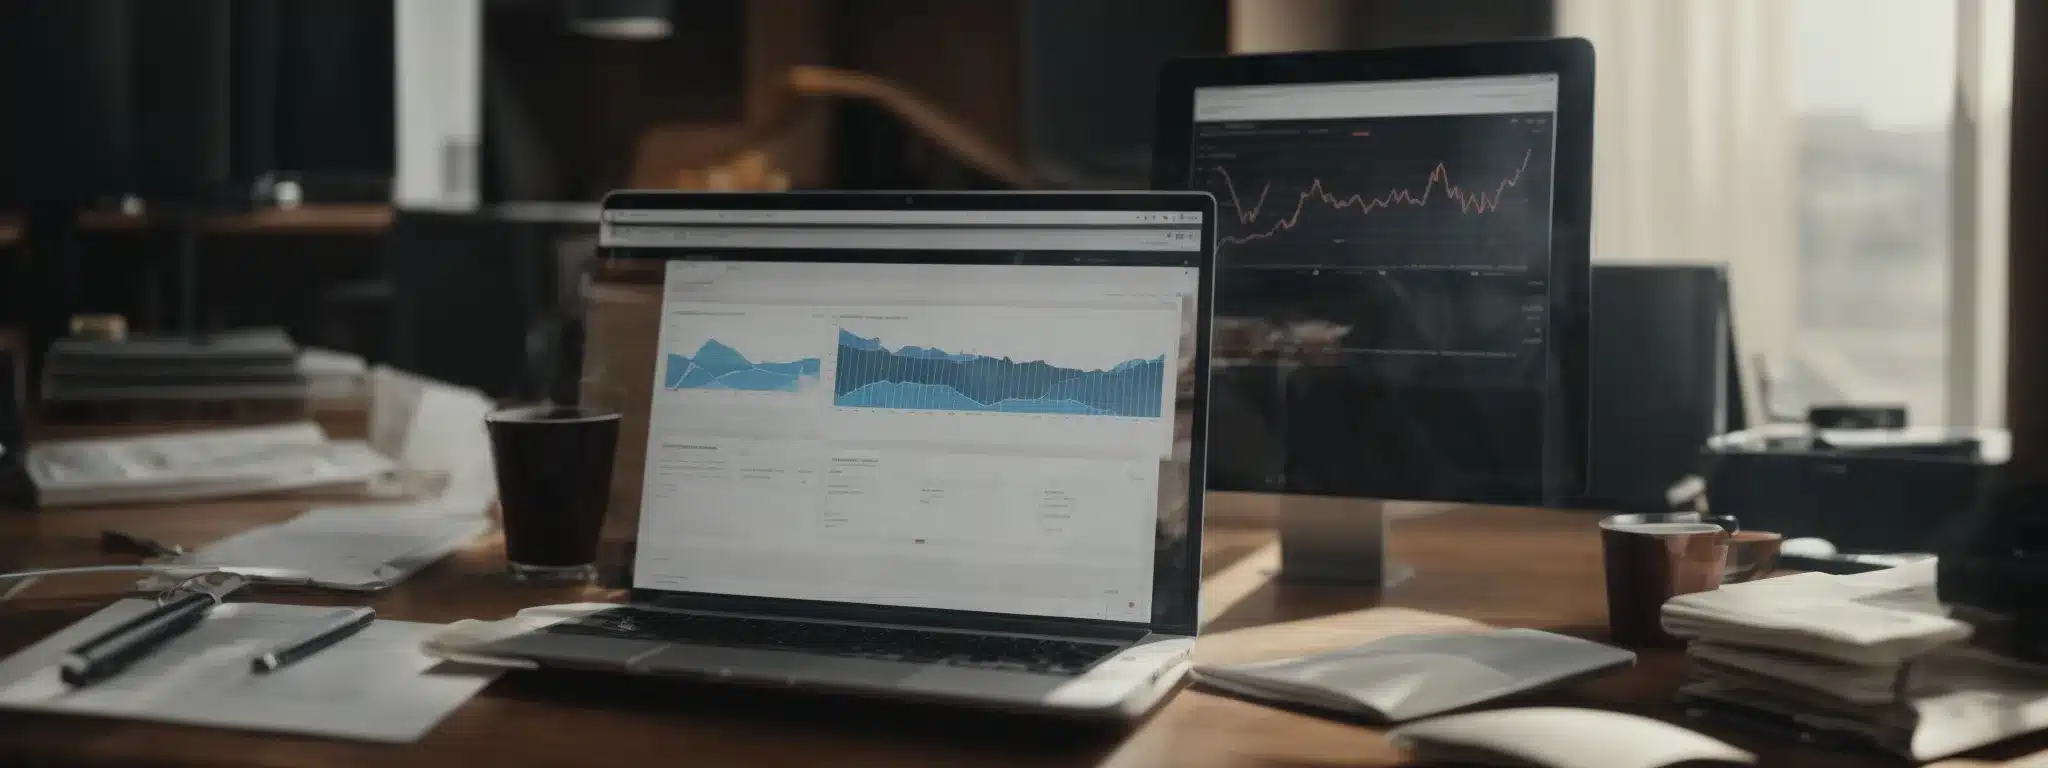 A Marketer Strategizes An Email Campaign On A Laptop With Analytics Charts In The Background.